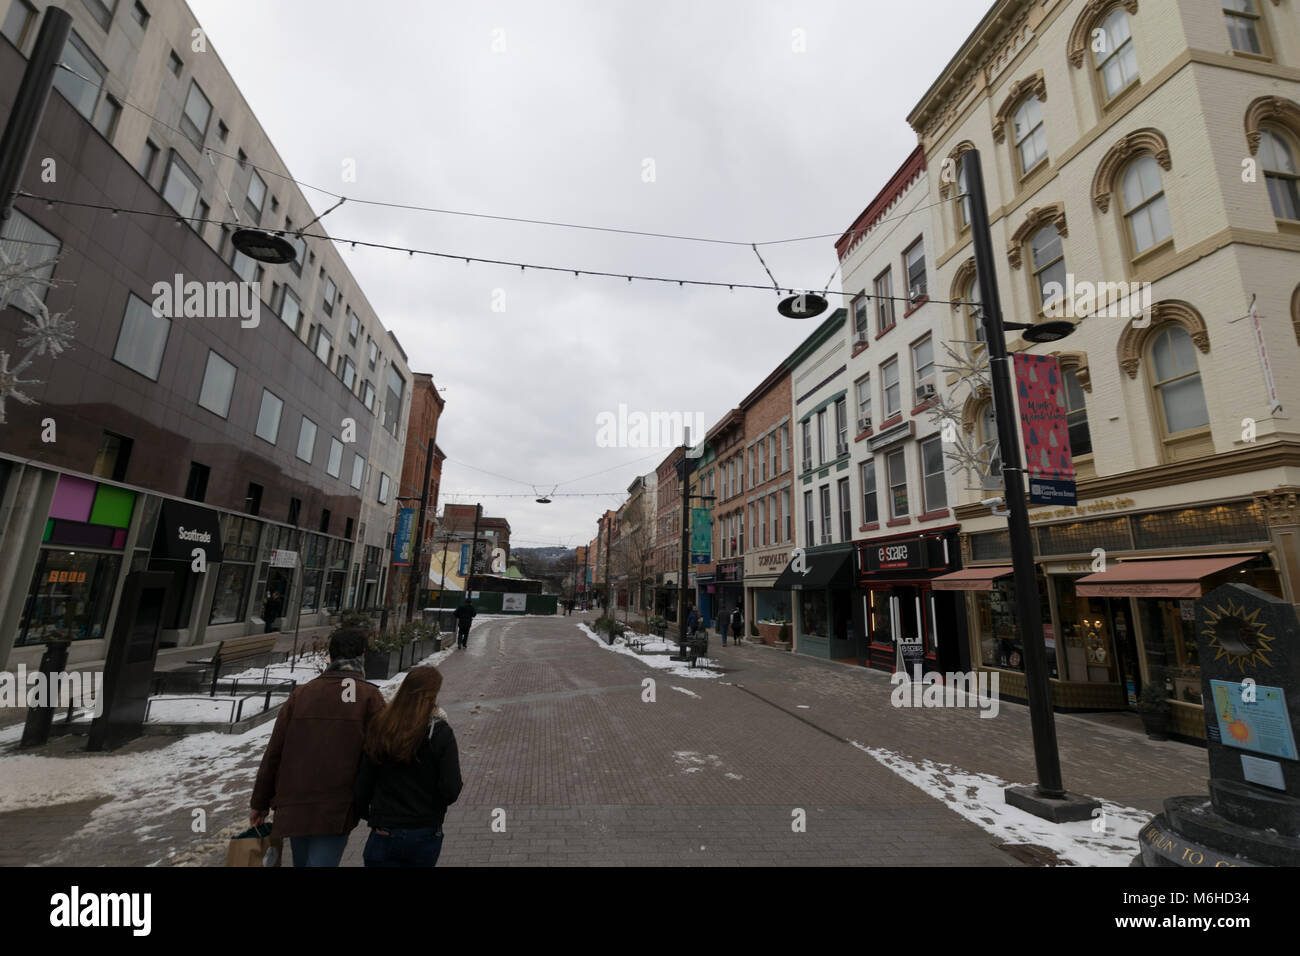 Downtown Ithaca Commons area, Ithaca NY Foto Stock